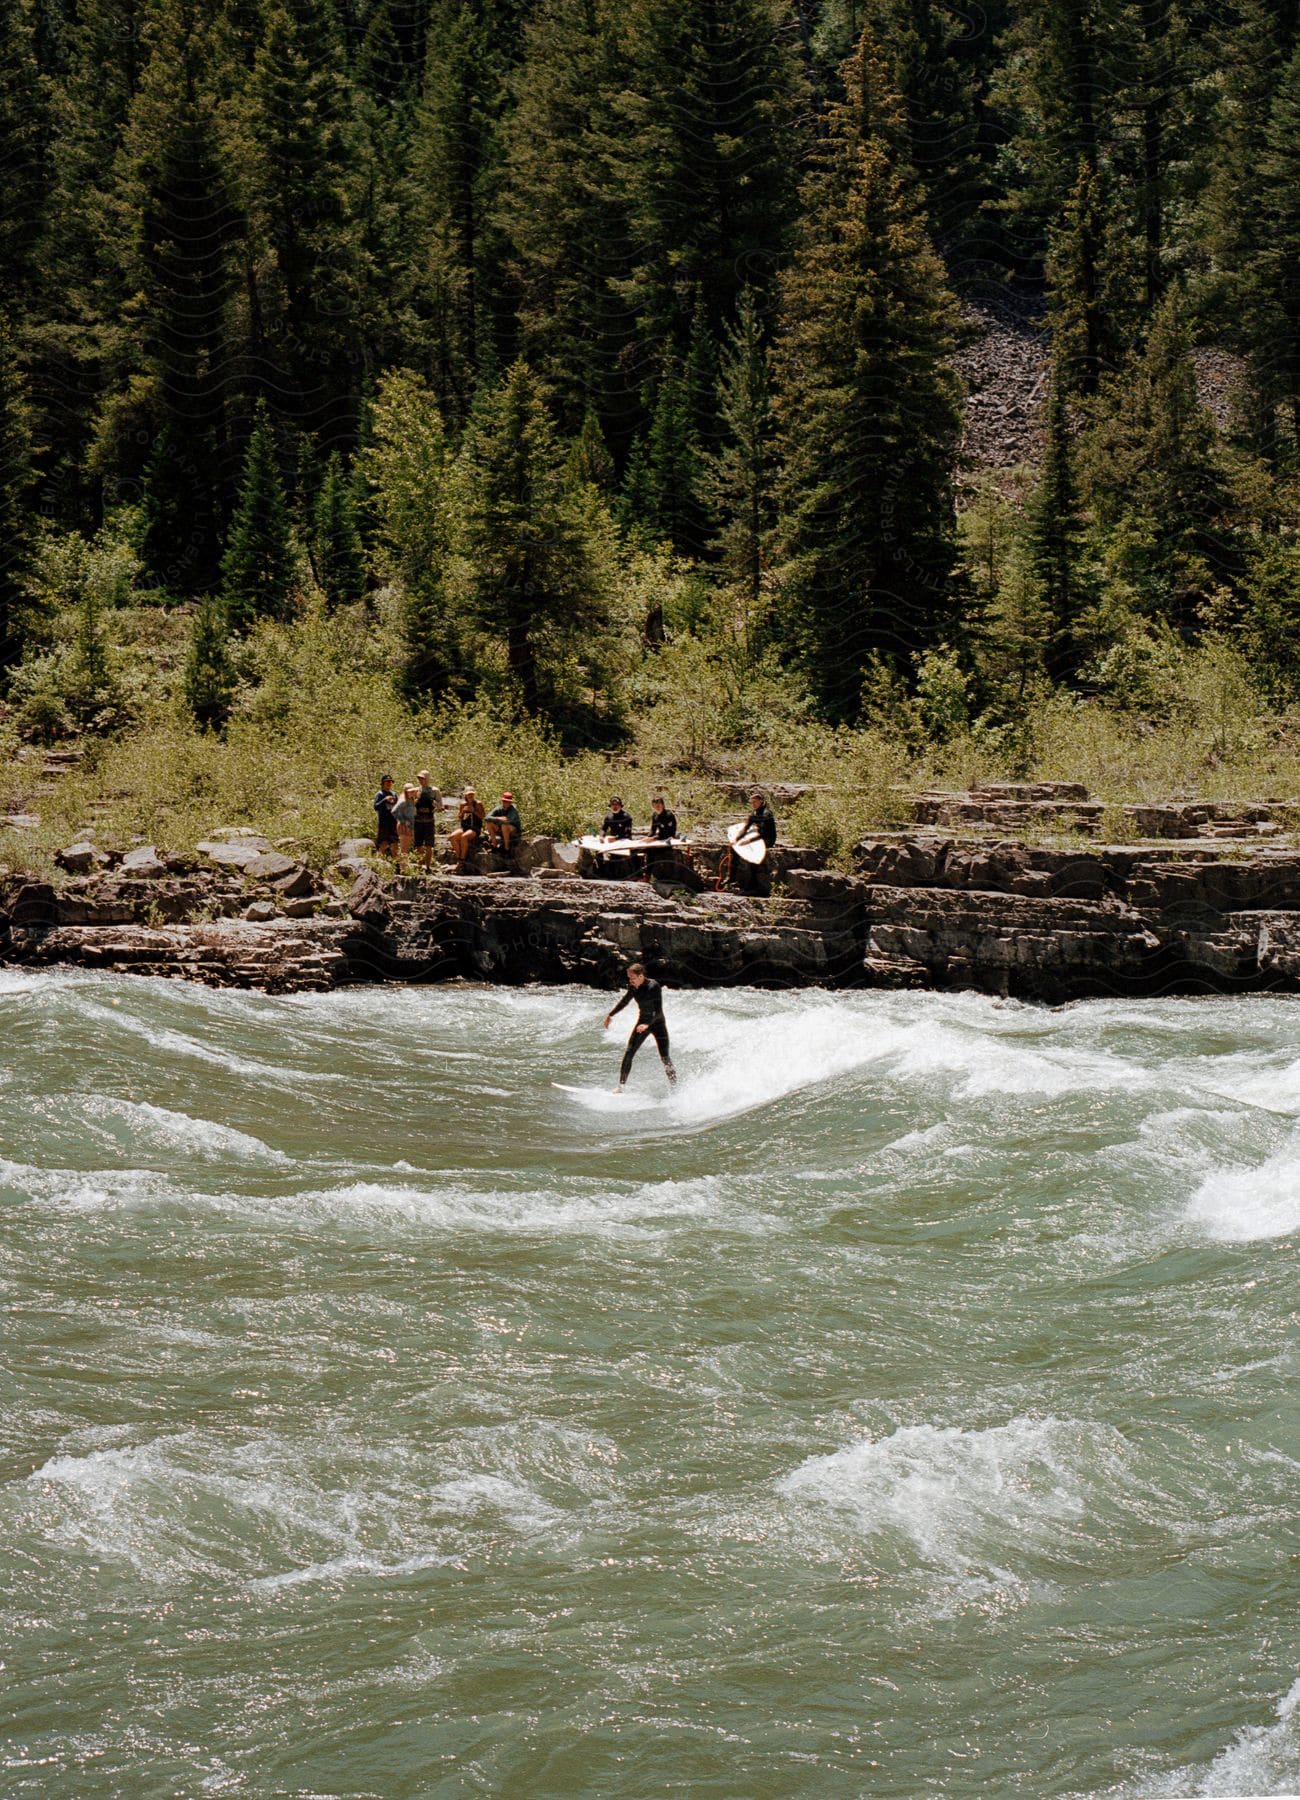 A person is surfing in the river while others are watching from the bank during the daytime.